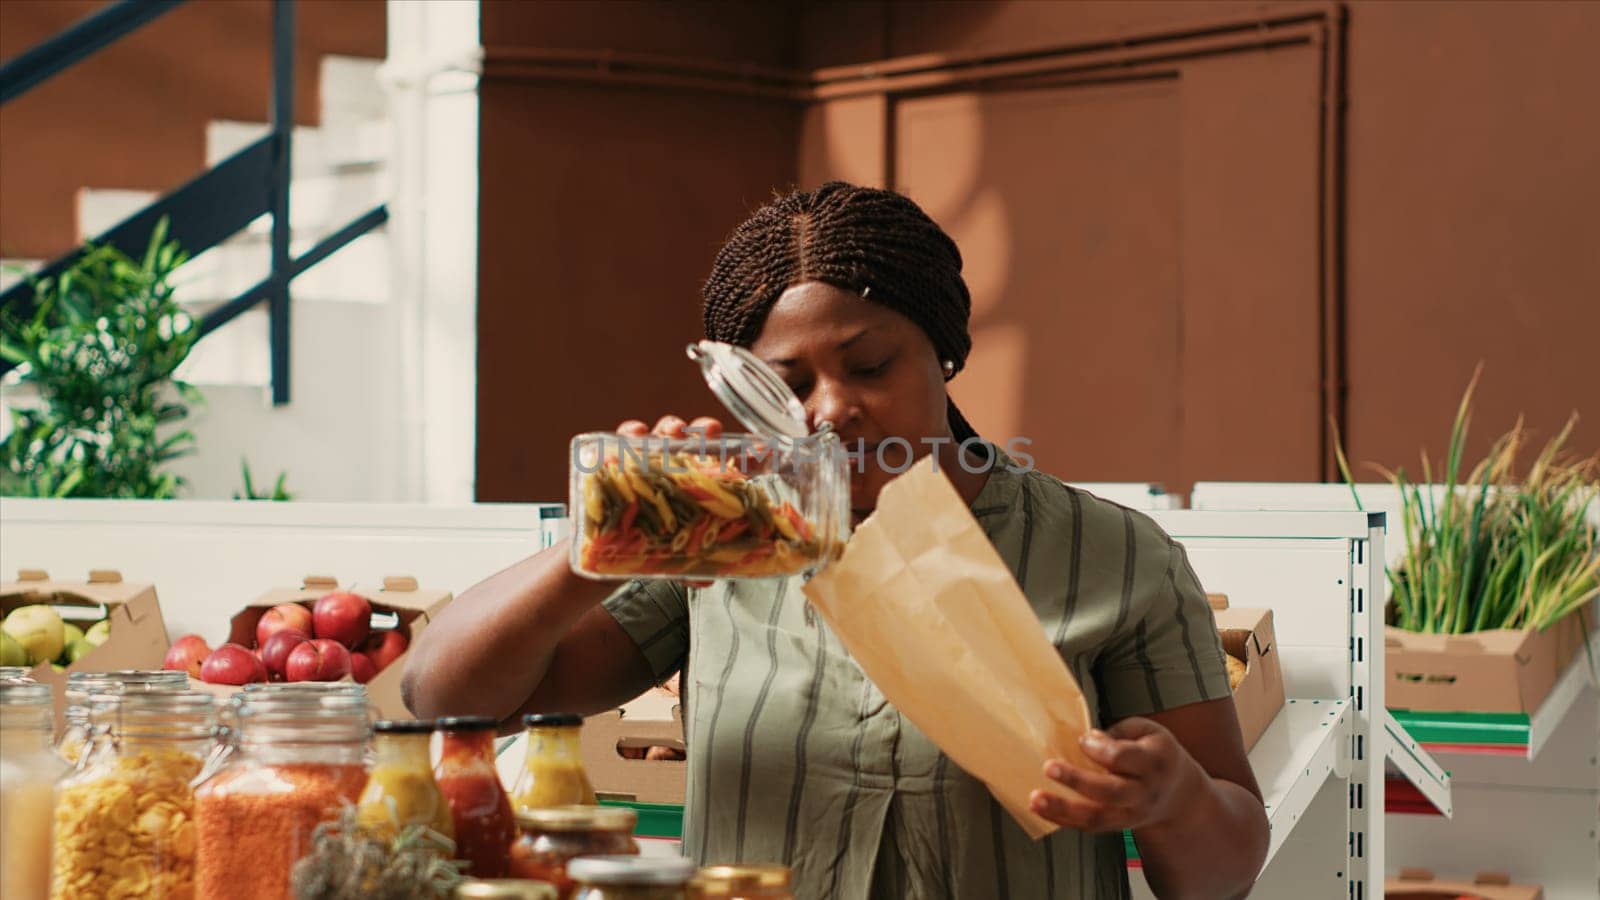 Woman client filling in paper bag with pasta sold as bulk item by DCStudio